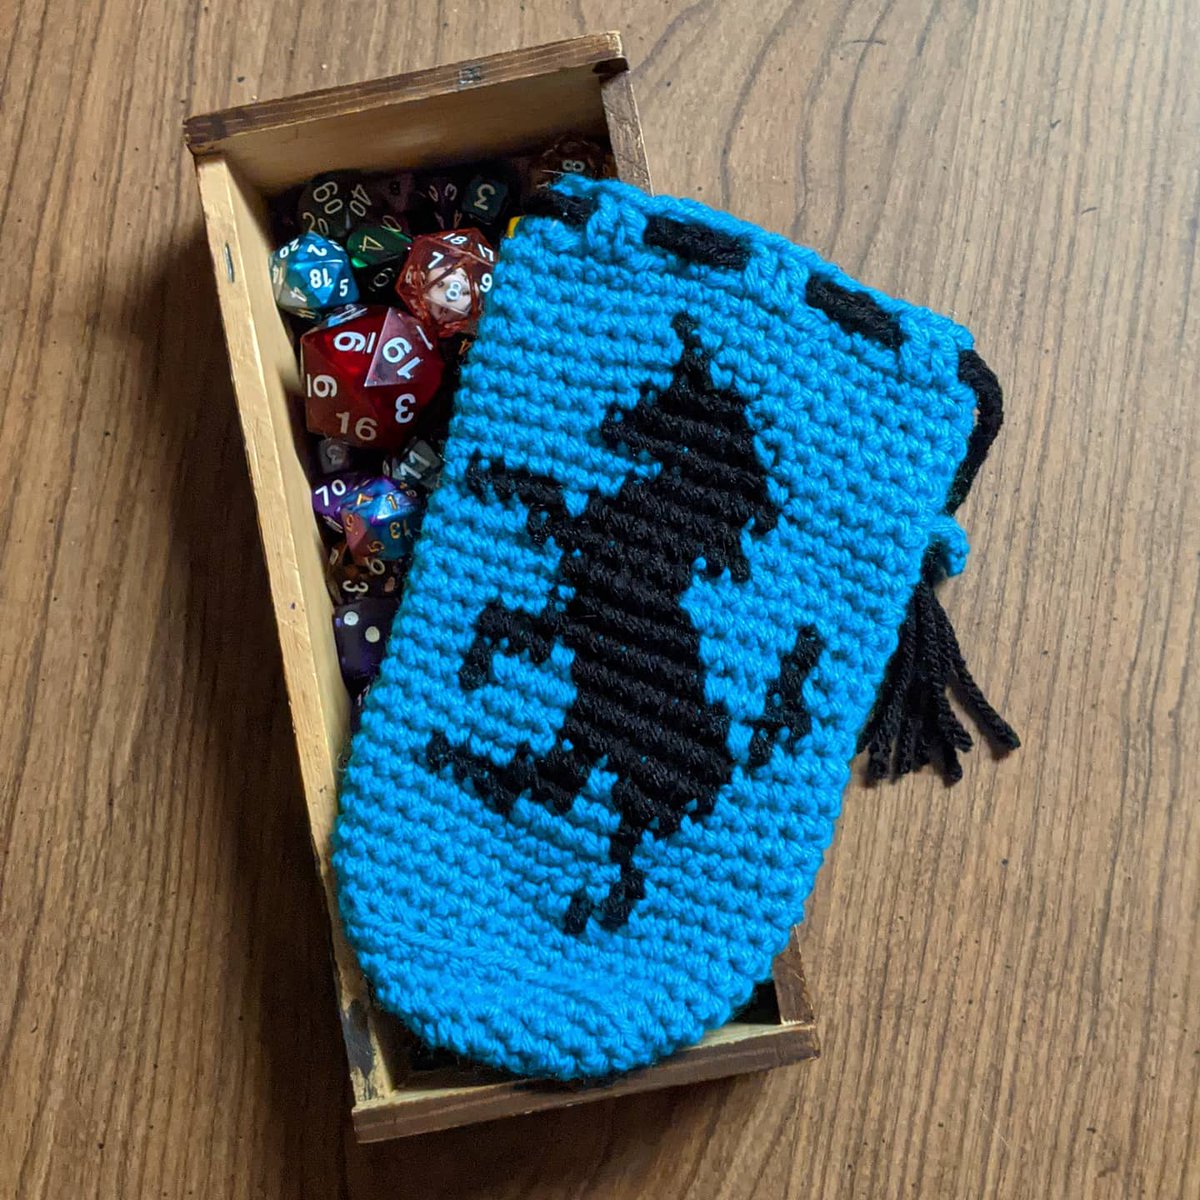 My unicorn dice bag is done and fits around 6 full sets of standard size dice (plus 2 mini sets & 2 large d20s) 😁! 
.
.
.
#dicebag #crochetdicebag #unicorndicebag #unicorncrochet #dnddicebags #crochetersofinstagram #crochet